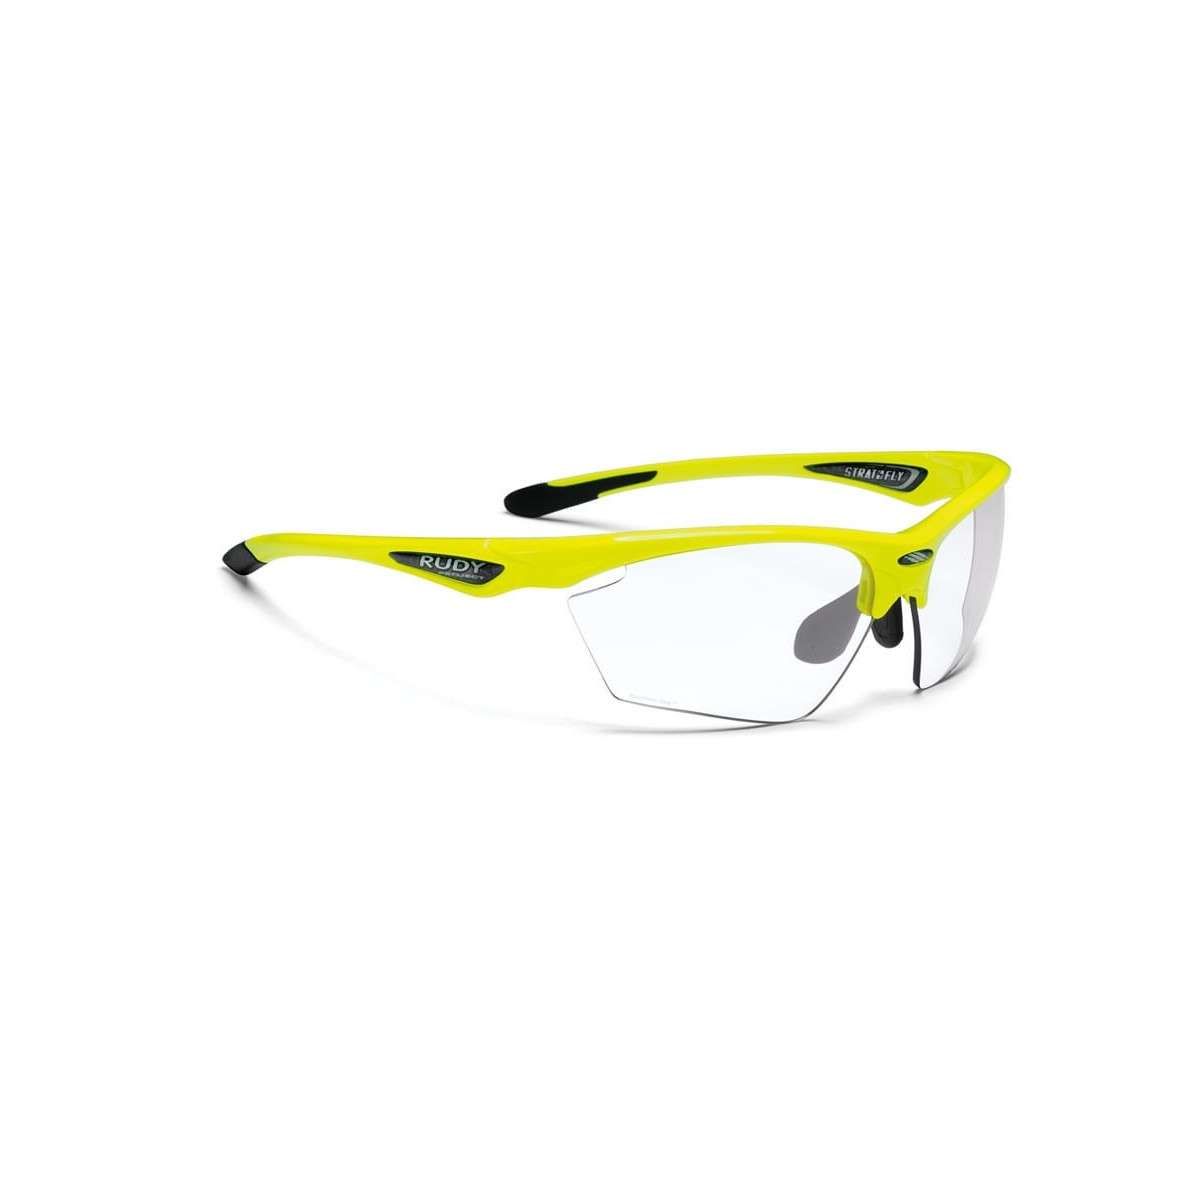 of a günstig Kaufen-Stratofly Yellow Fluo RPO Photoclear Rudy Project Brille. Stratofly Yellow Fluo RPO Photoclear Rudy Project Brille . 